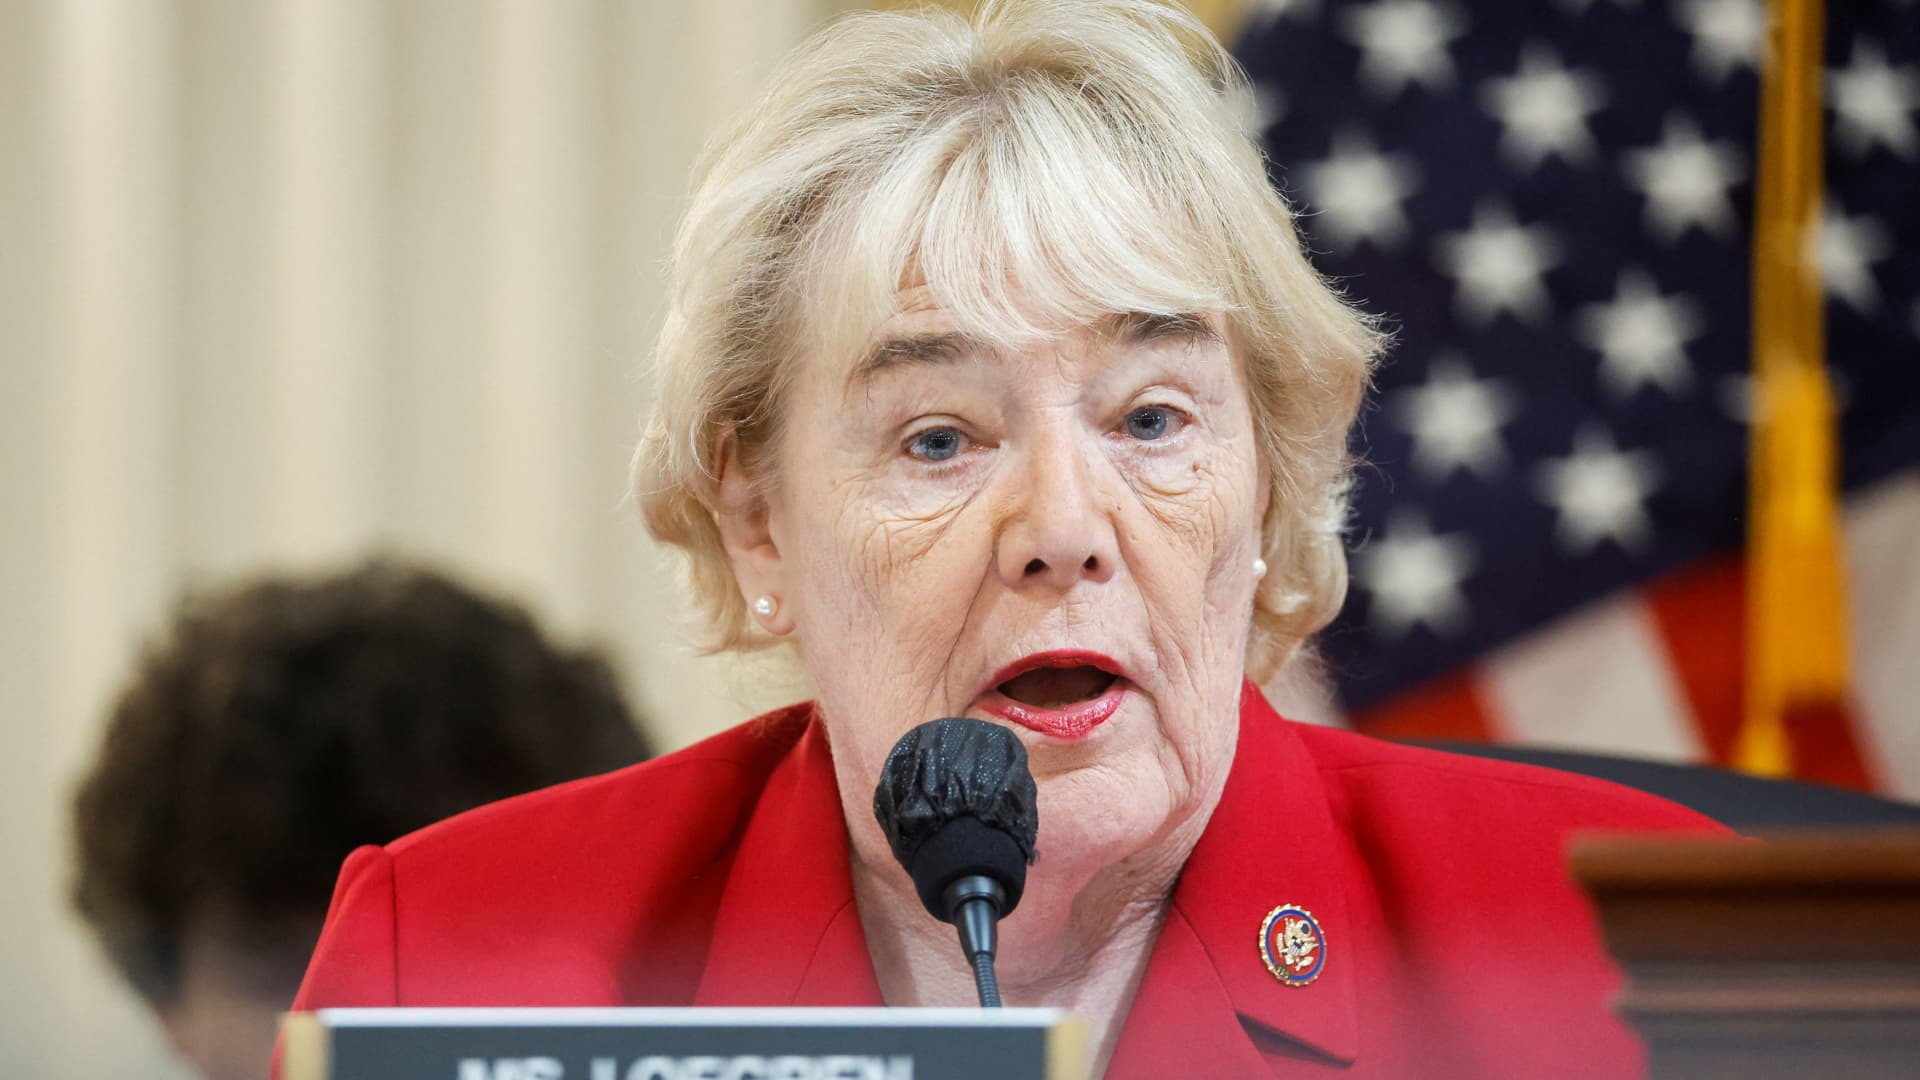 U.S. Representative Zoe Lofgren (D-CA) speaks during the second public hearing of the U.S. House Select Committee to Investigate the January 6 Attack on the United States Capitol, at Capitol Hill, in Washington, U.S. June 13, 2022.